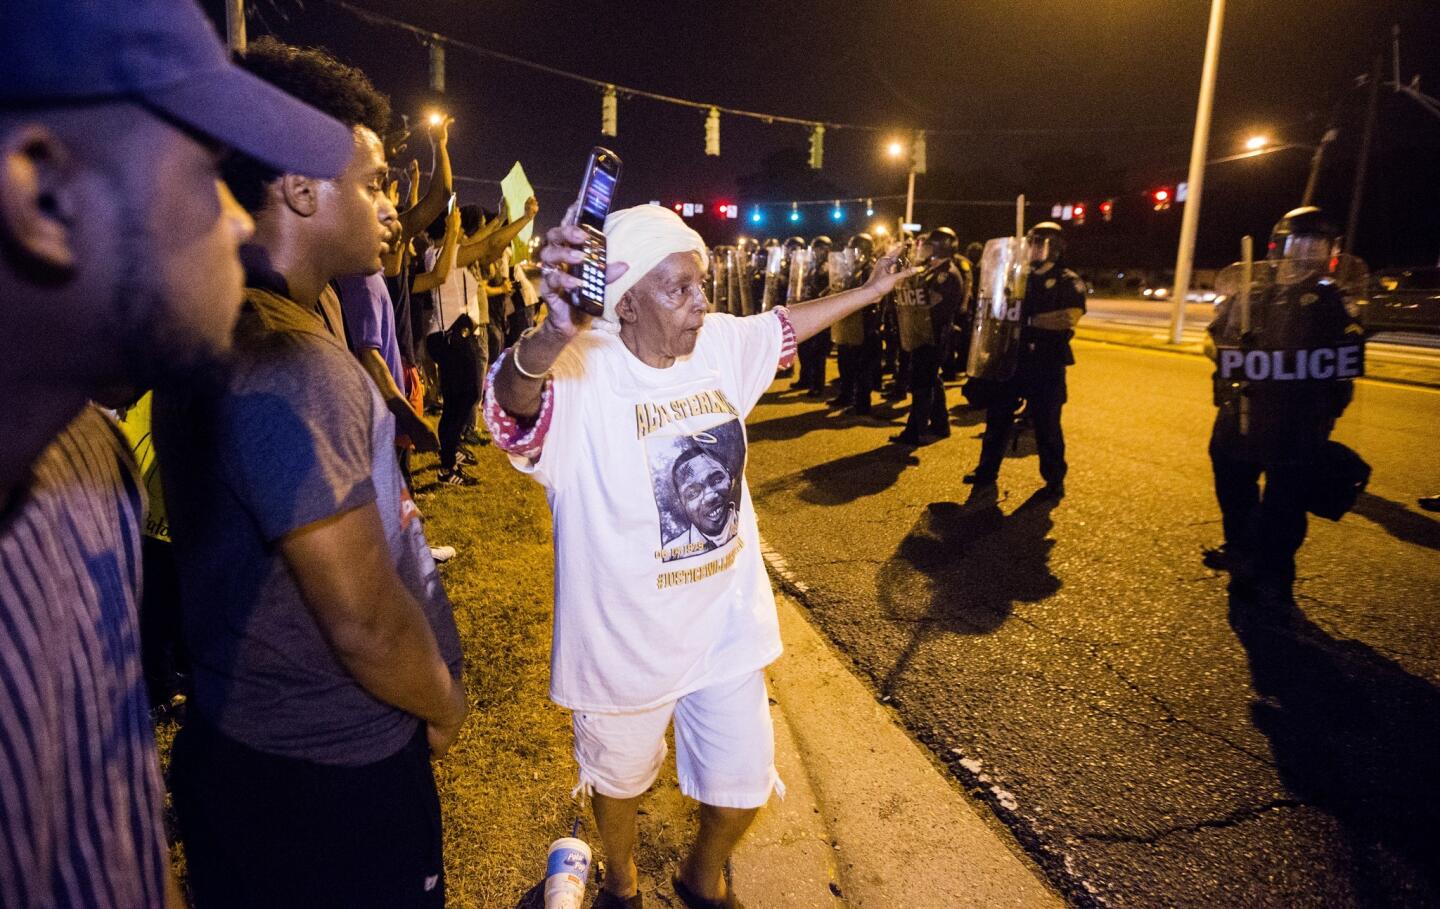 People gather to protest the shooting of Alton Sterling on July 10, 2016, in Baton Rouge, Louisiana.